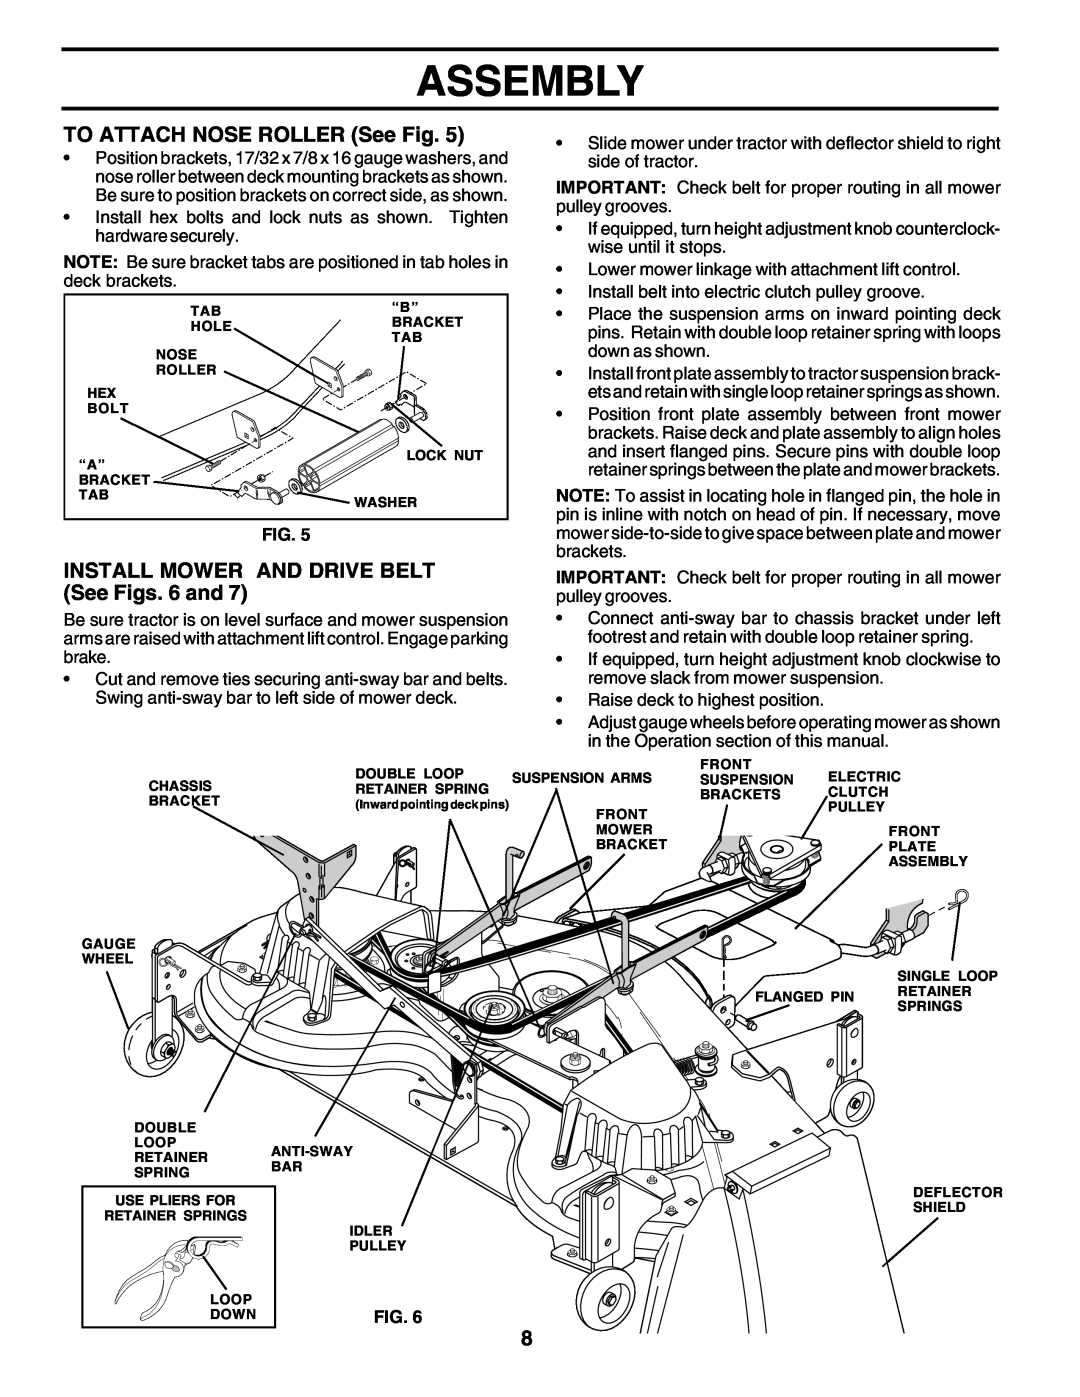 Poulan PRGT22H50C owner manual Assembly, TO ATTACH NOSE ROLLER See Fig, INSTALL MOWER AND DRIVE BELT See Figs. 6 and 